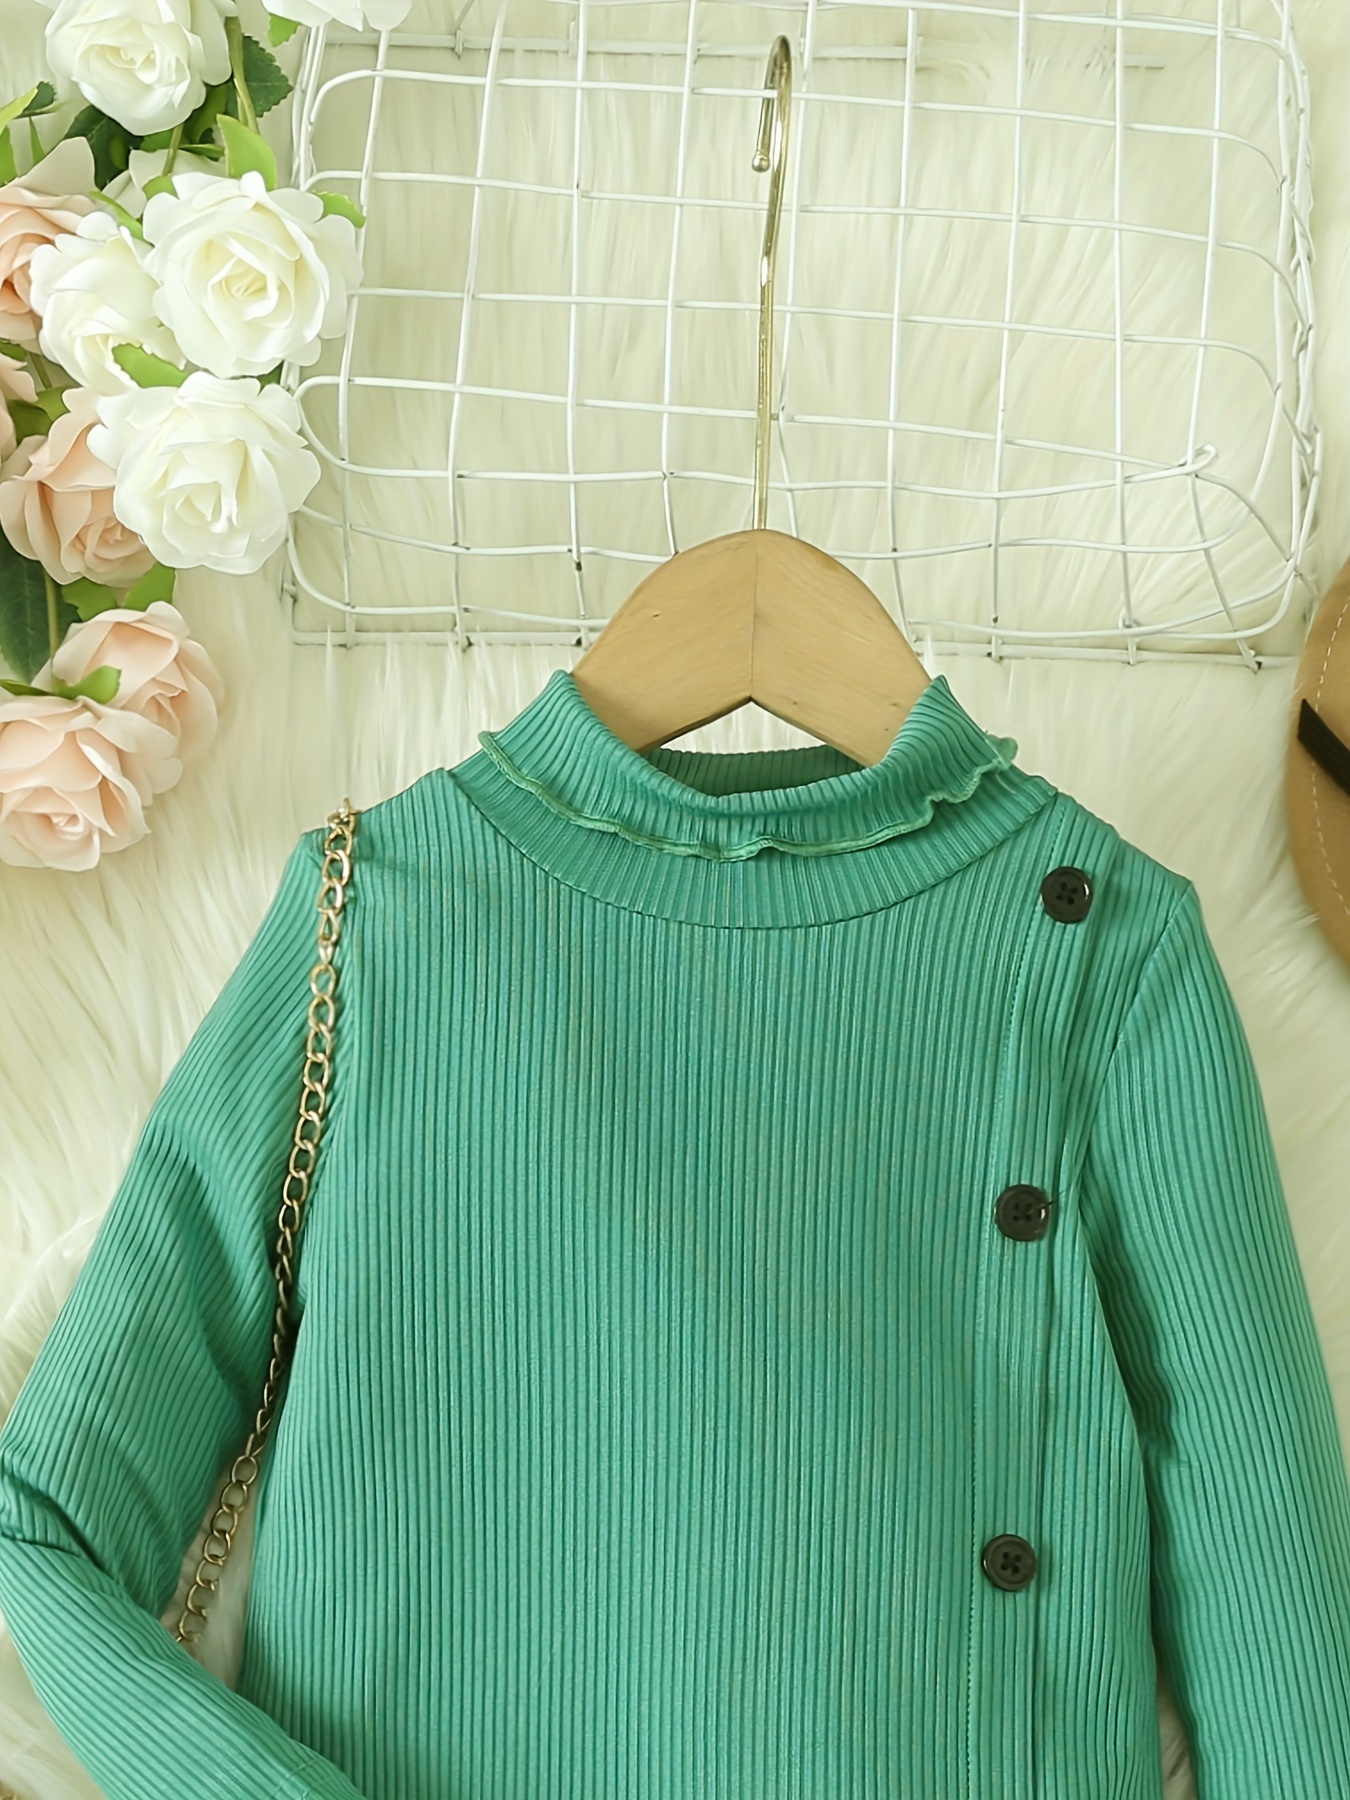 Baby Girl Warm Winter Clothes, Fall Girl Clothing, Green and Blue